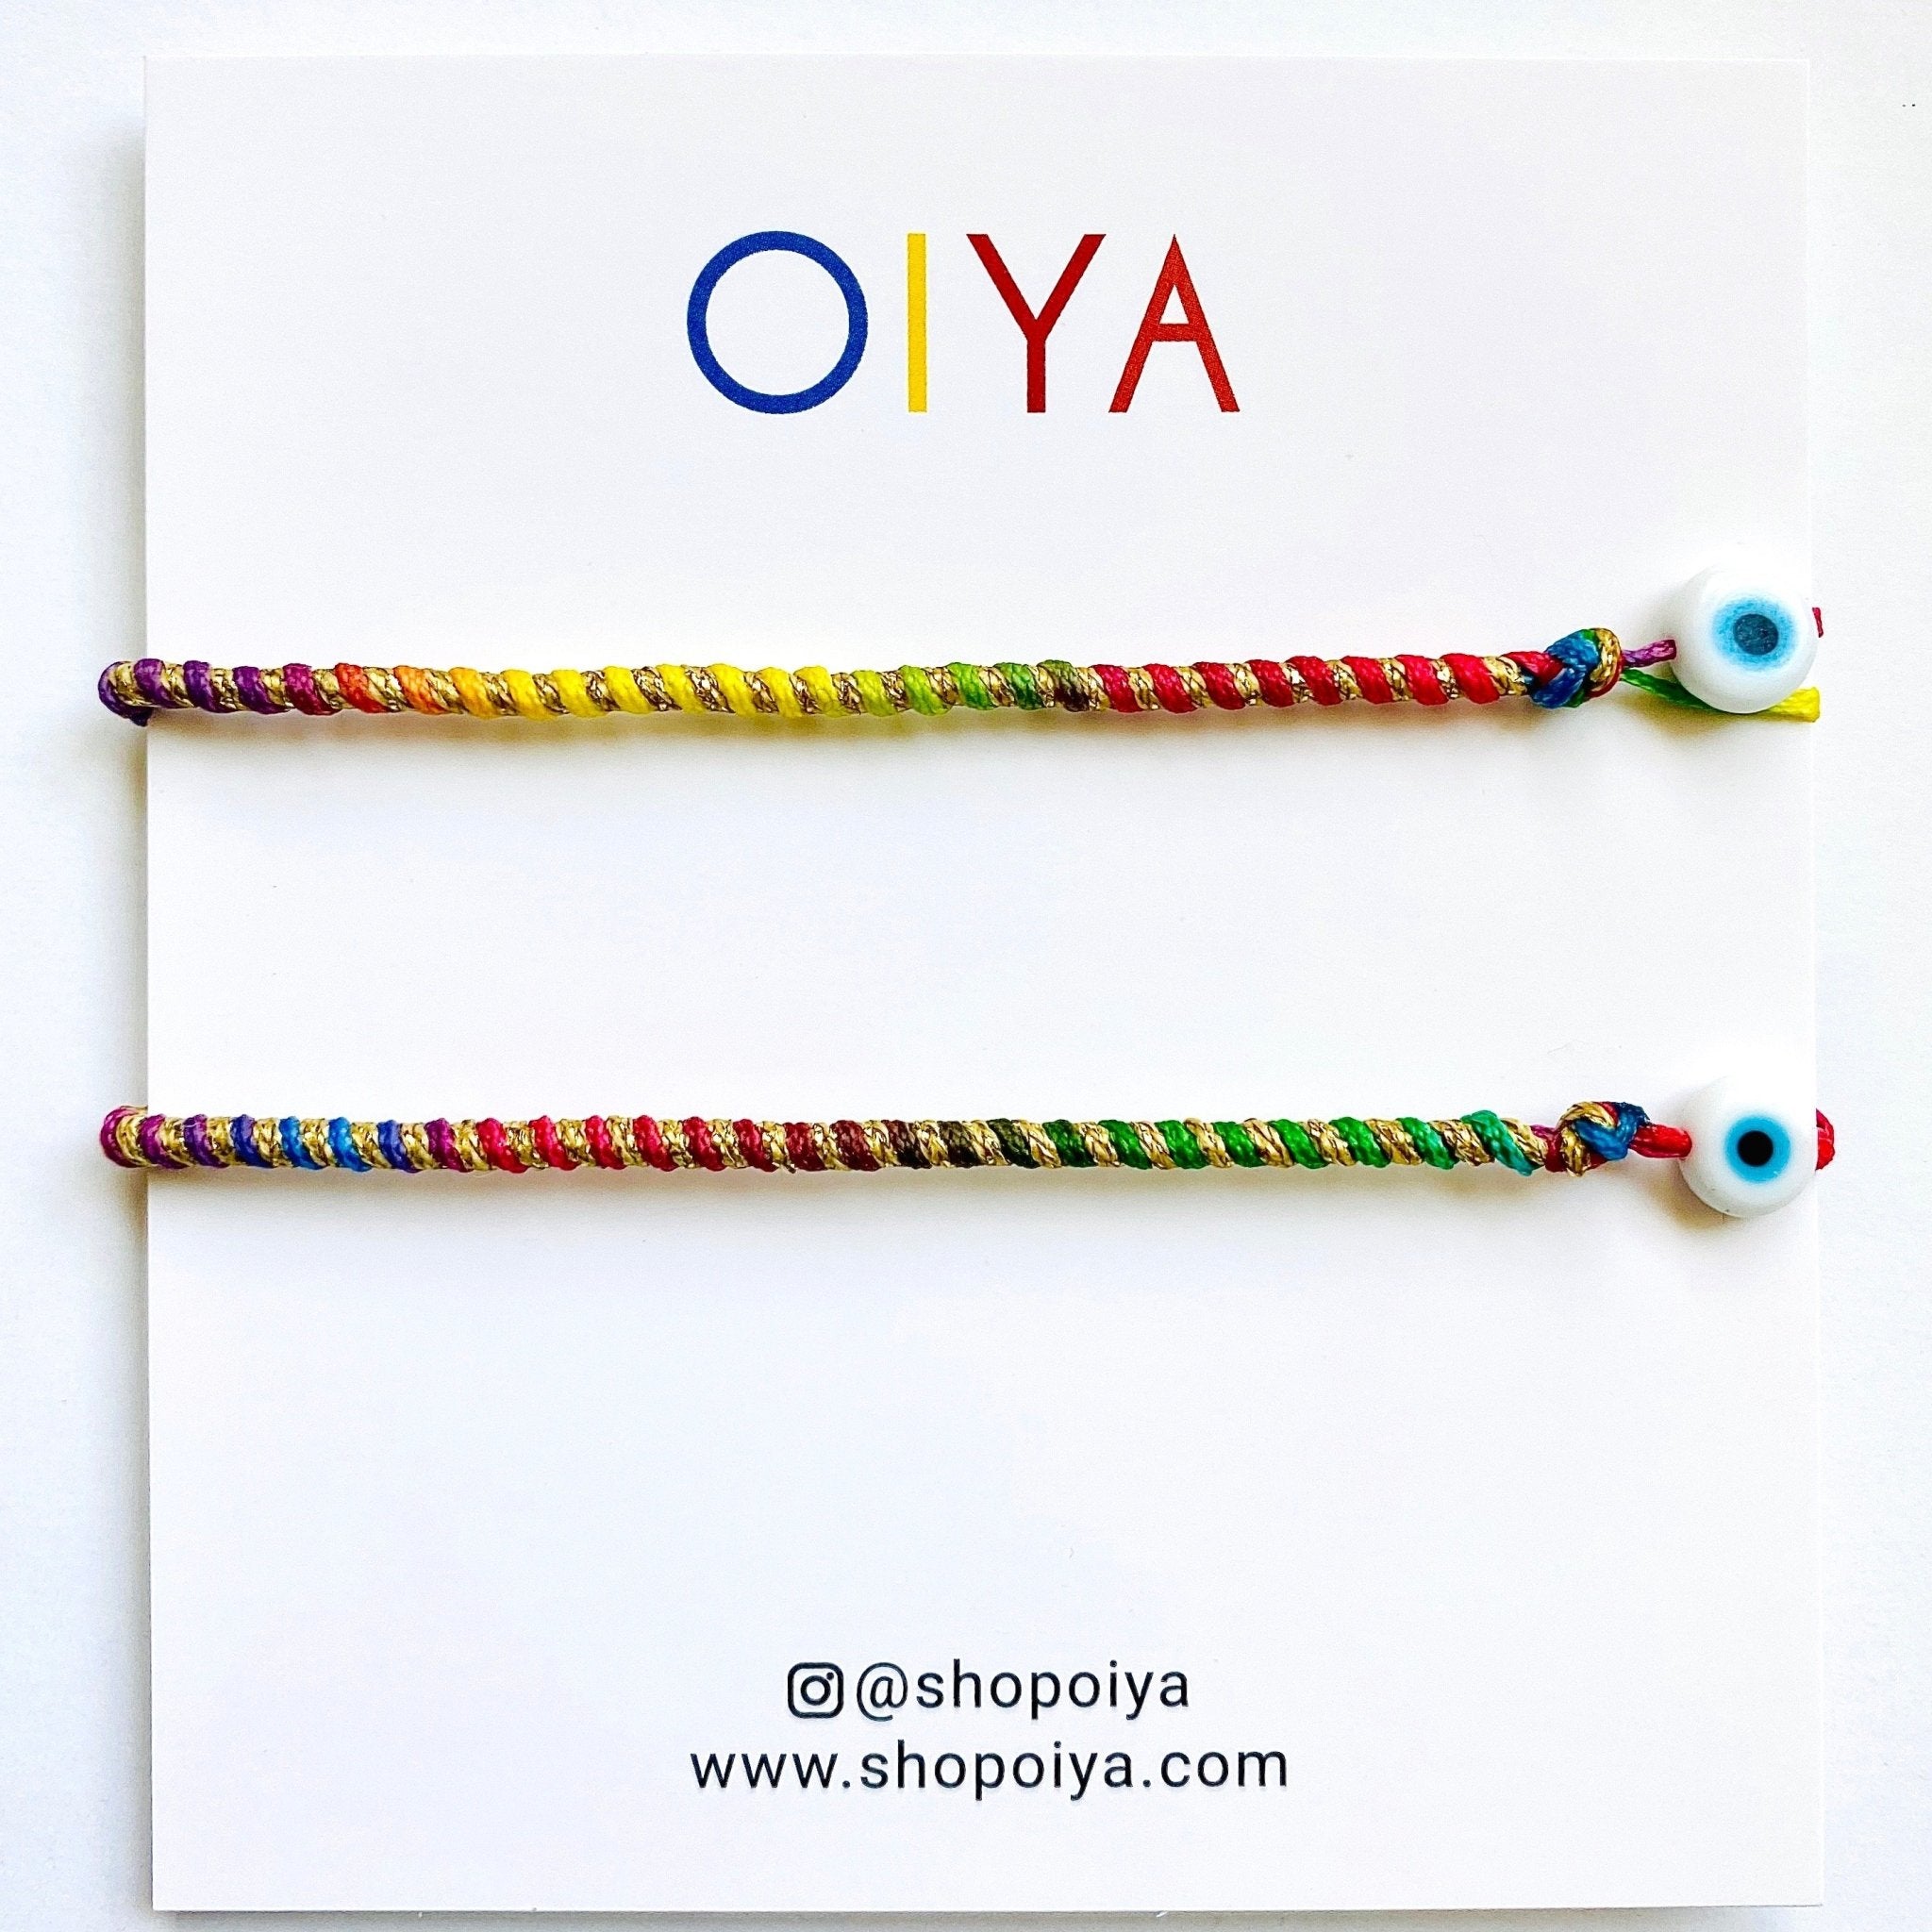 Set 1 - Twisted Duo Color Braceletcategory_Accessories from OIYA - SHOPELEOS